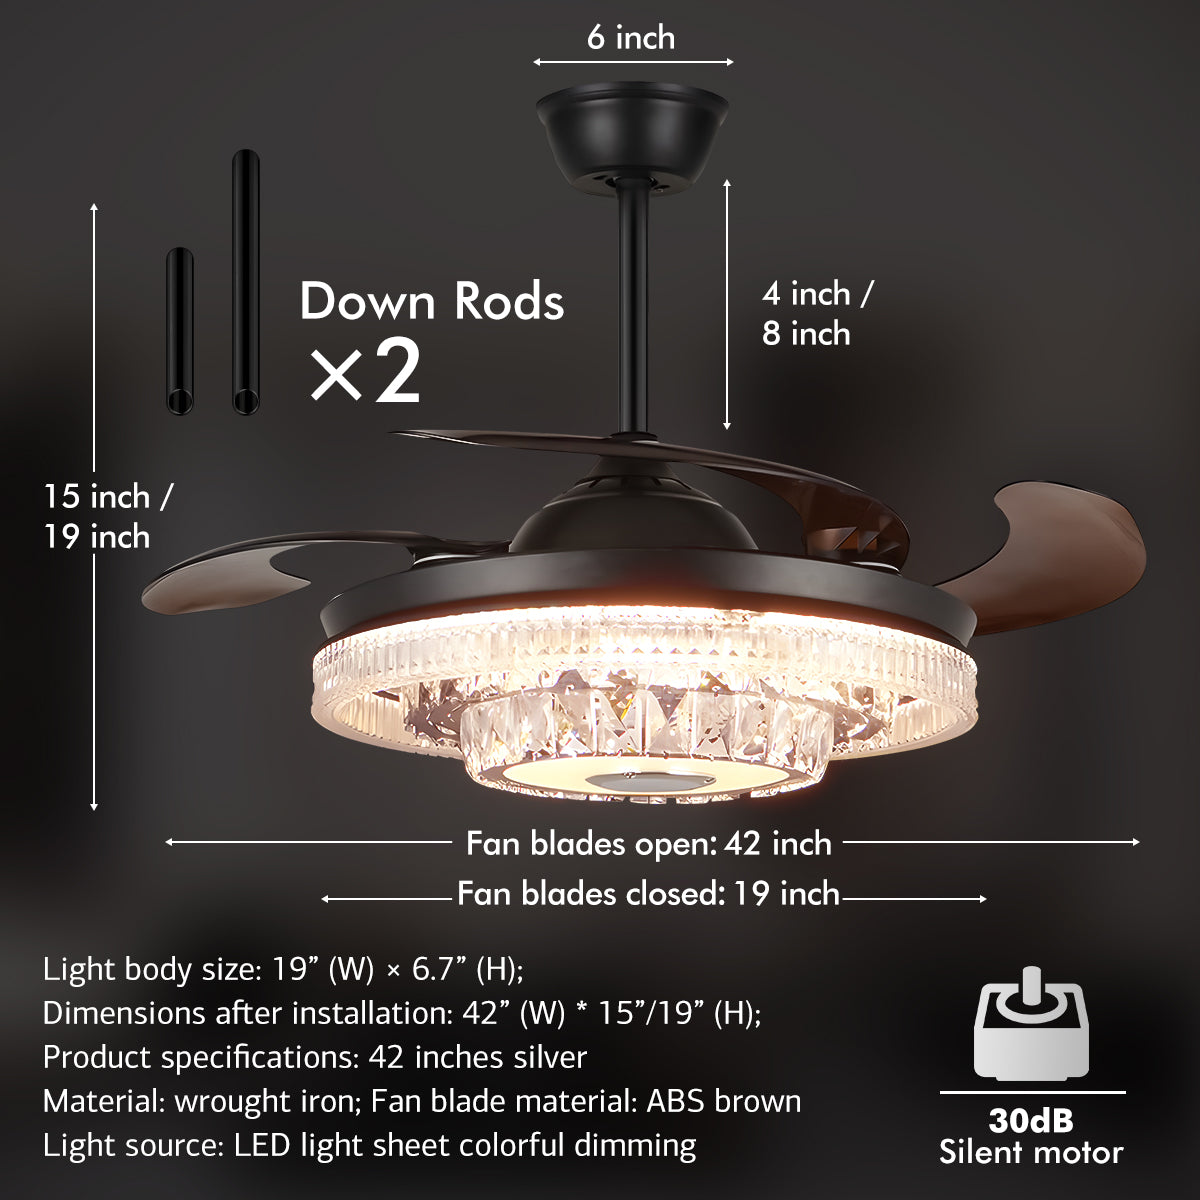 42" Modern Variable Frequency Crystal Ceiling Fan with Light